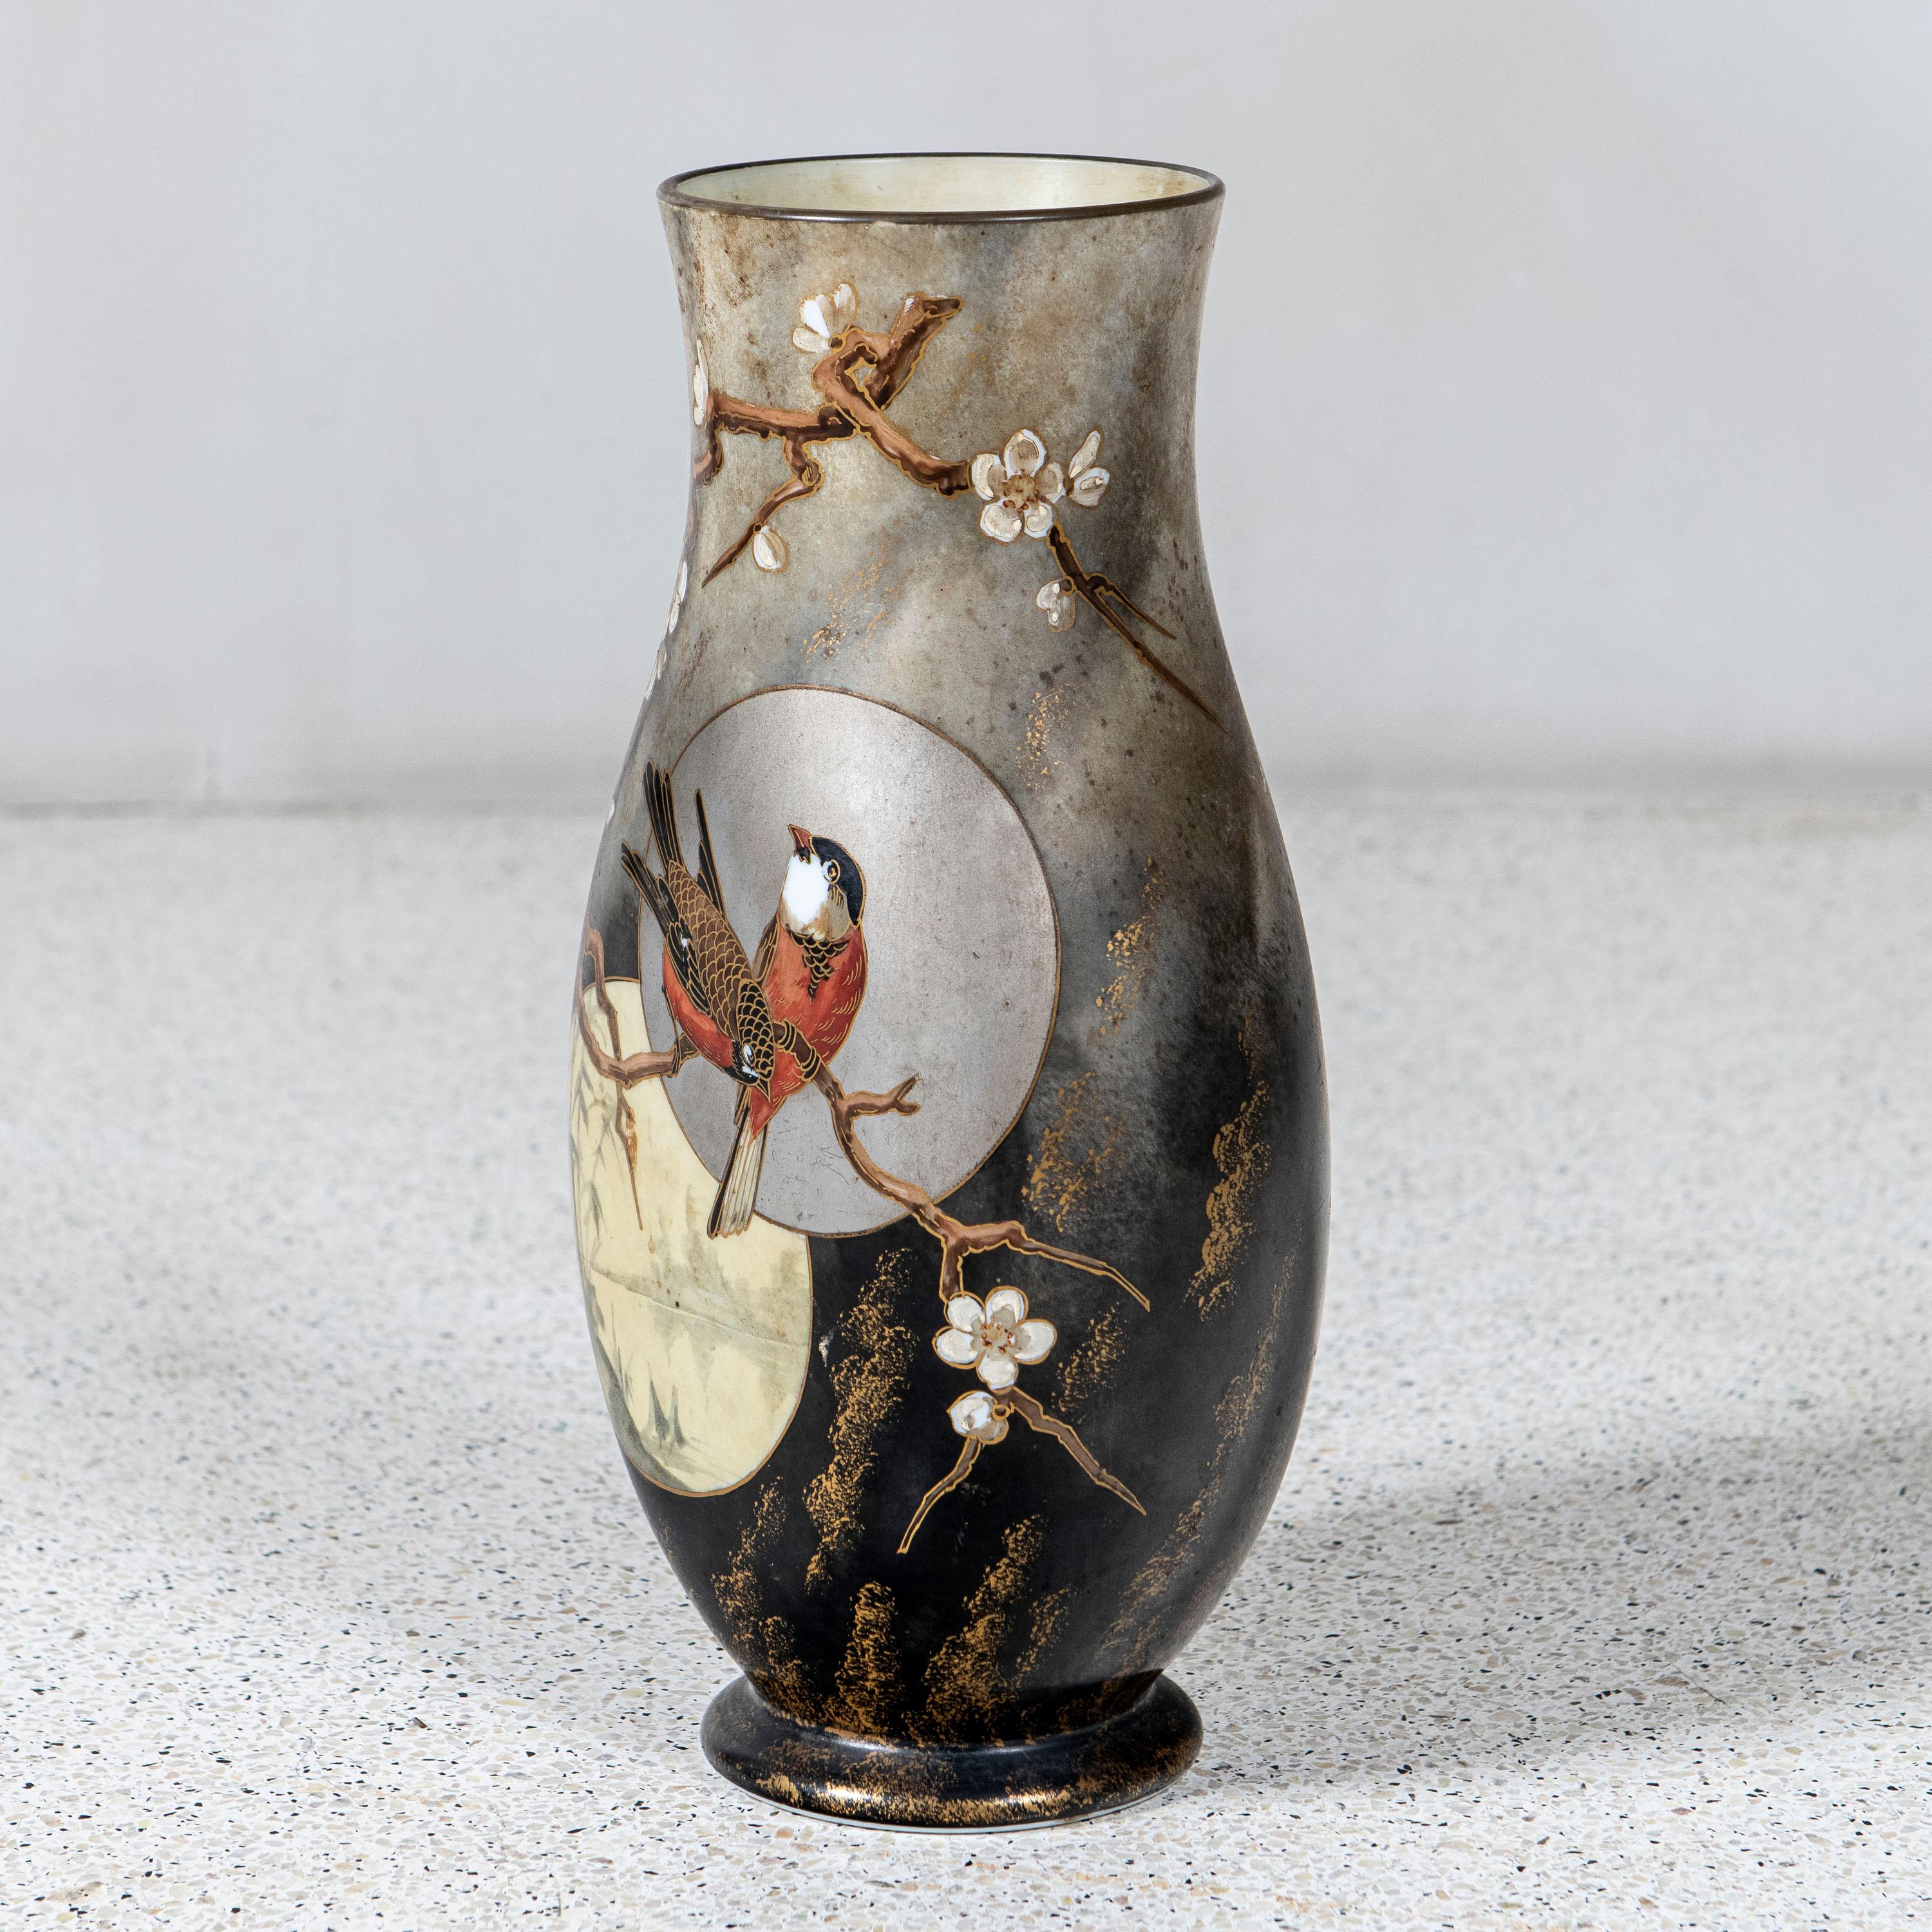 Baccarat painted opaline glass vase. France, late 19th century.